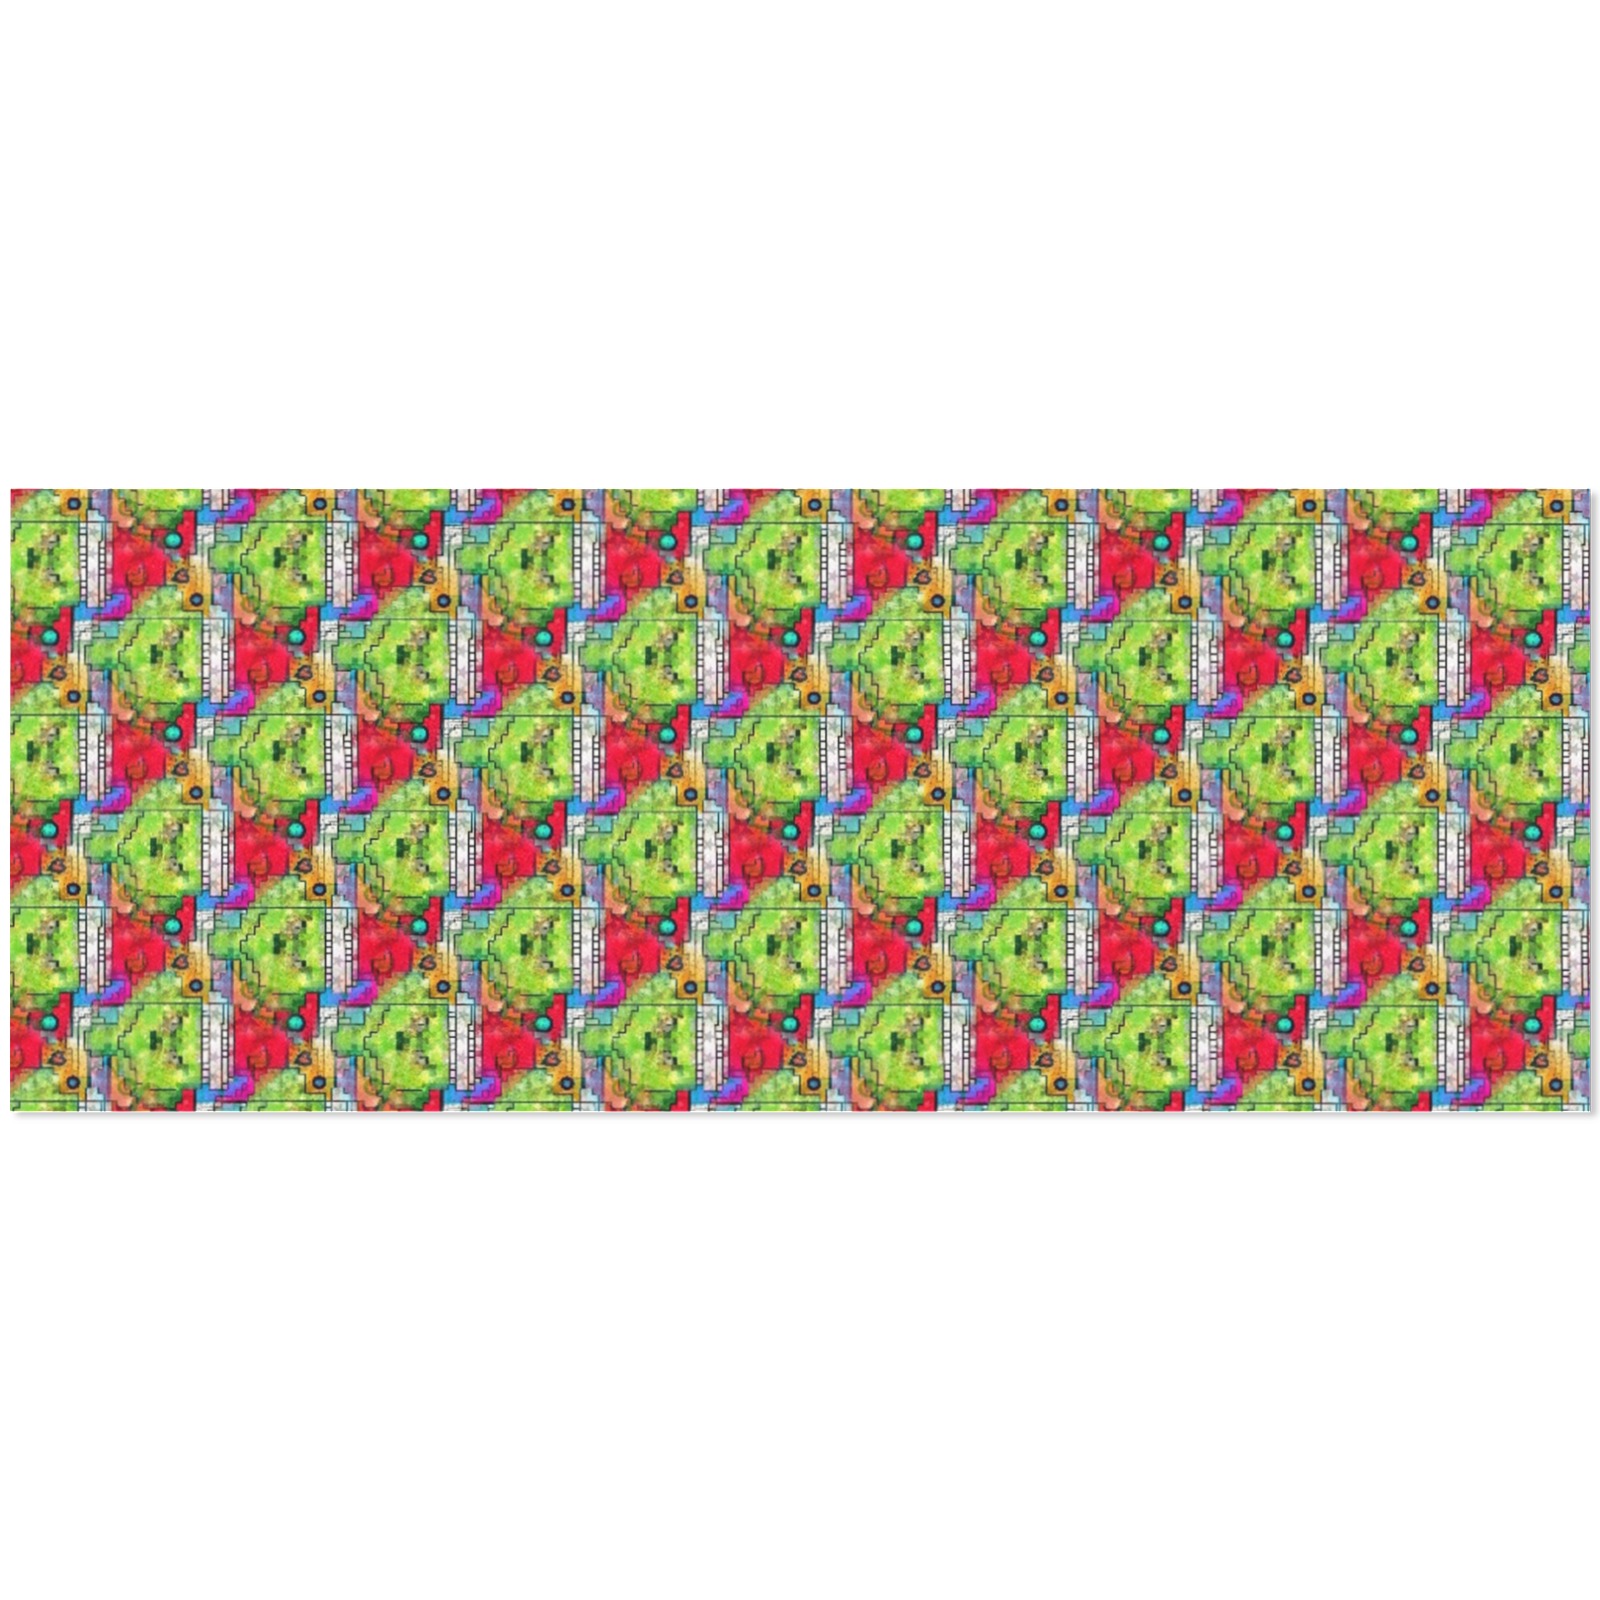 Green Christmas by Nico Bielow Gift Wrapping Paper 58"x 23" (2 Rolls)